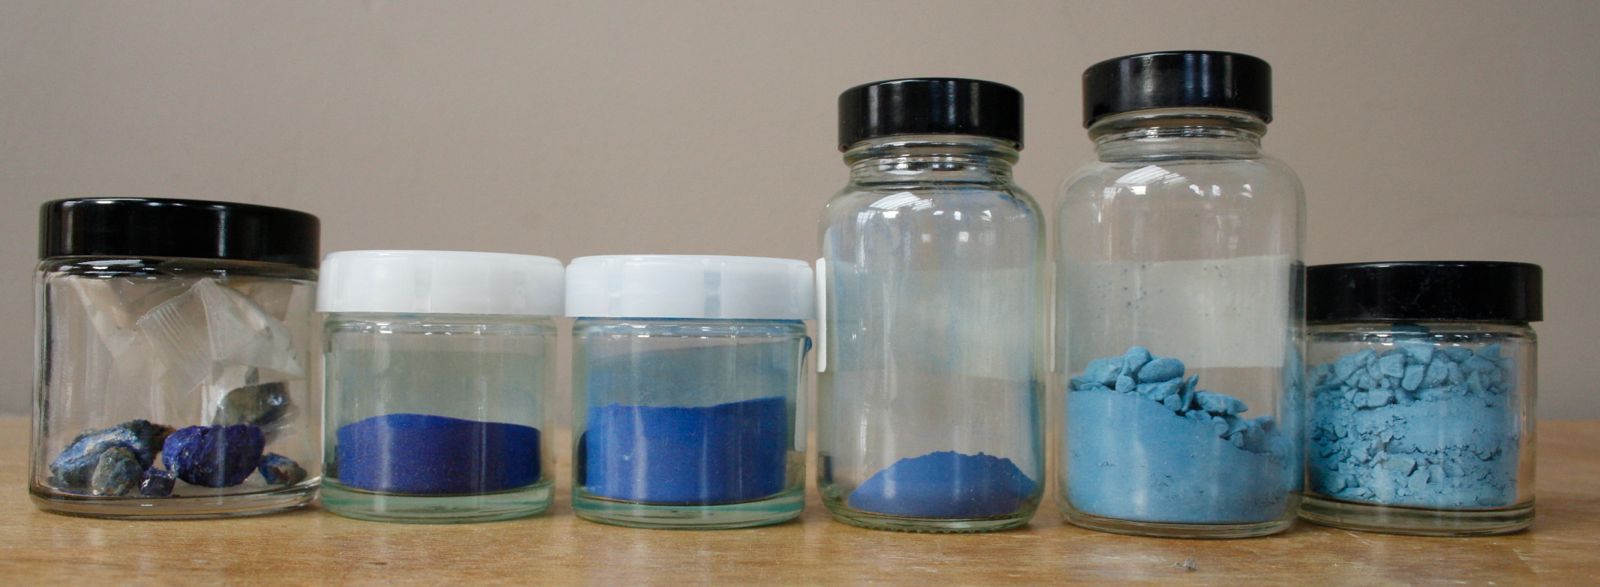 Azurite mineral (far left) and grades 1 to 5 of the pigment (going from left to right). Grade 1 azurite is of the highest quality and has the largest particle sizes.